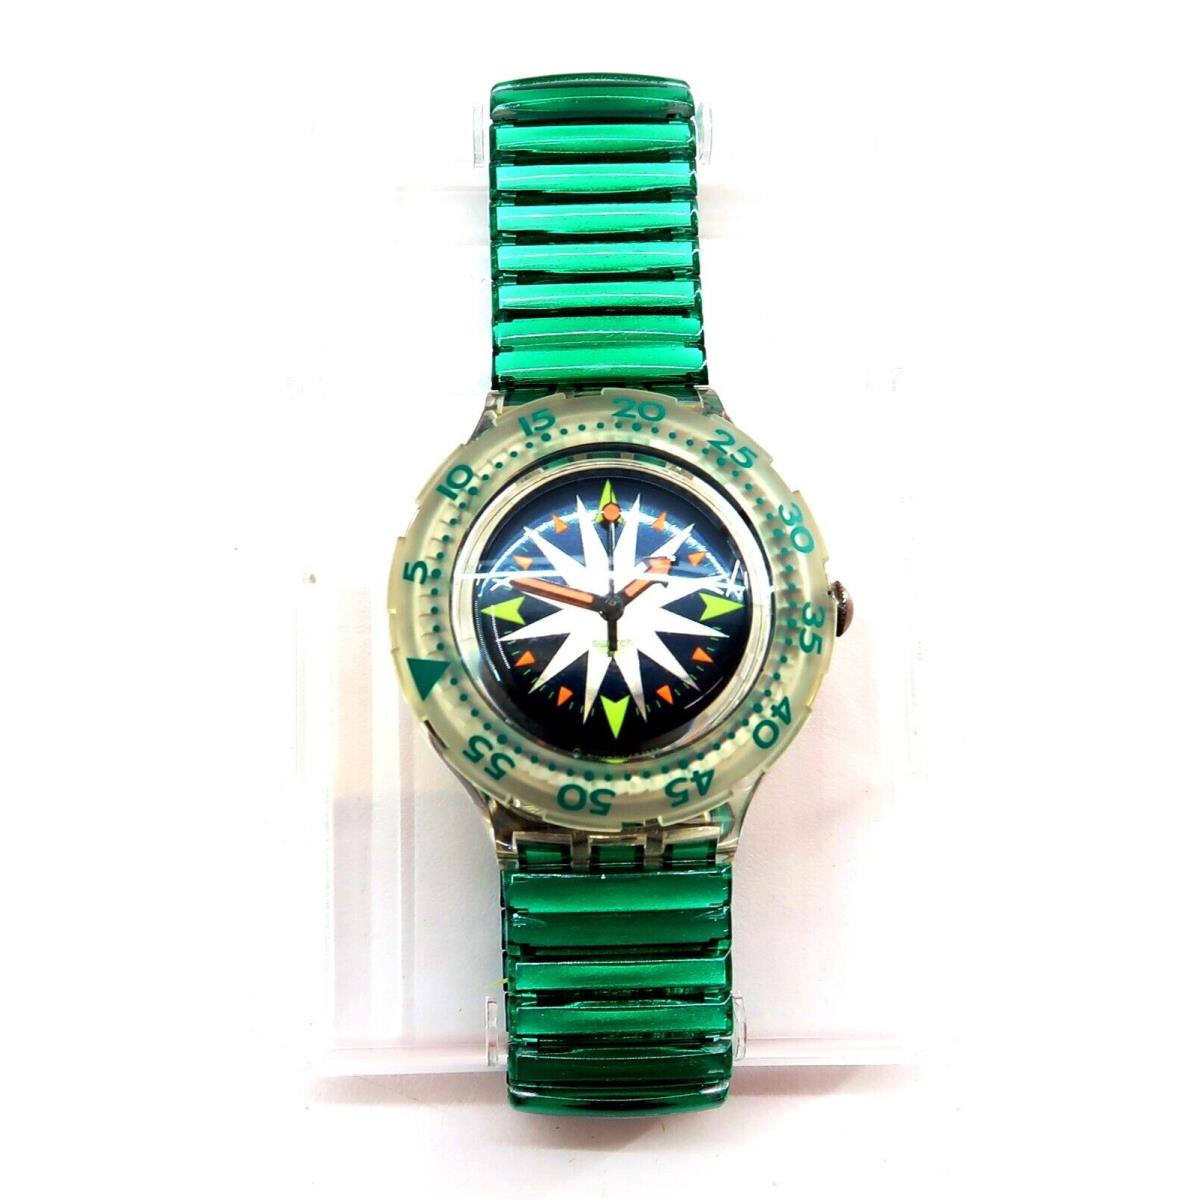 Swatch Scuba 200 Watch Mint Drops SDK108 / 109 with Case and Papers 1993 Nos - Dial: , Band: Green, Bezel: